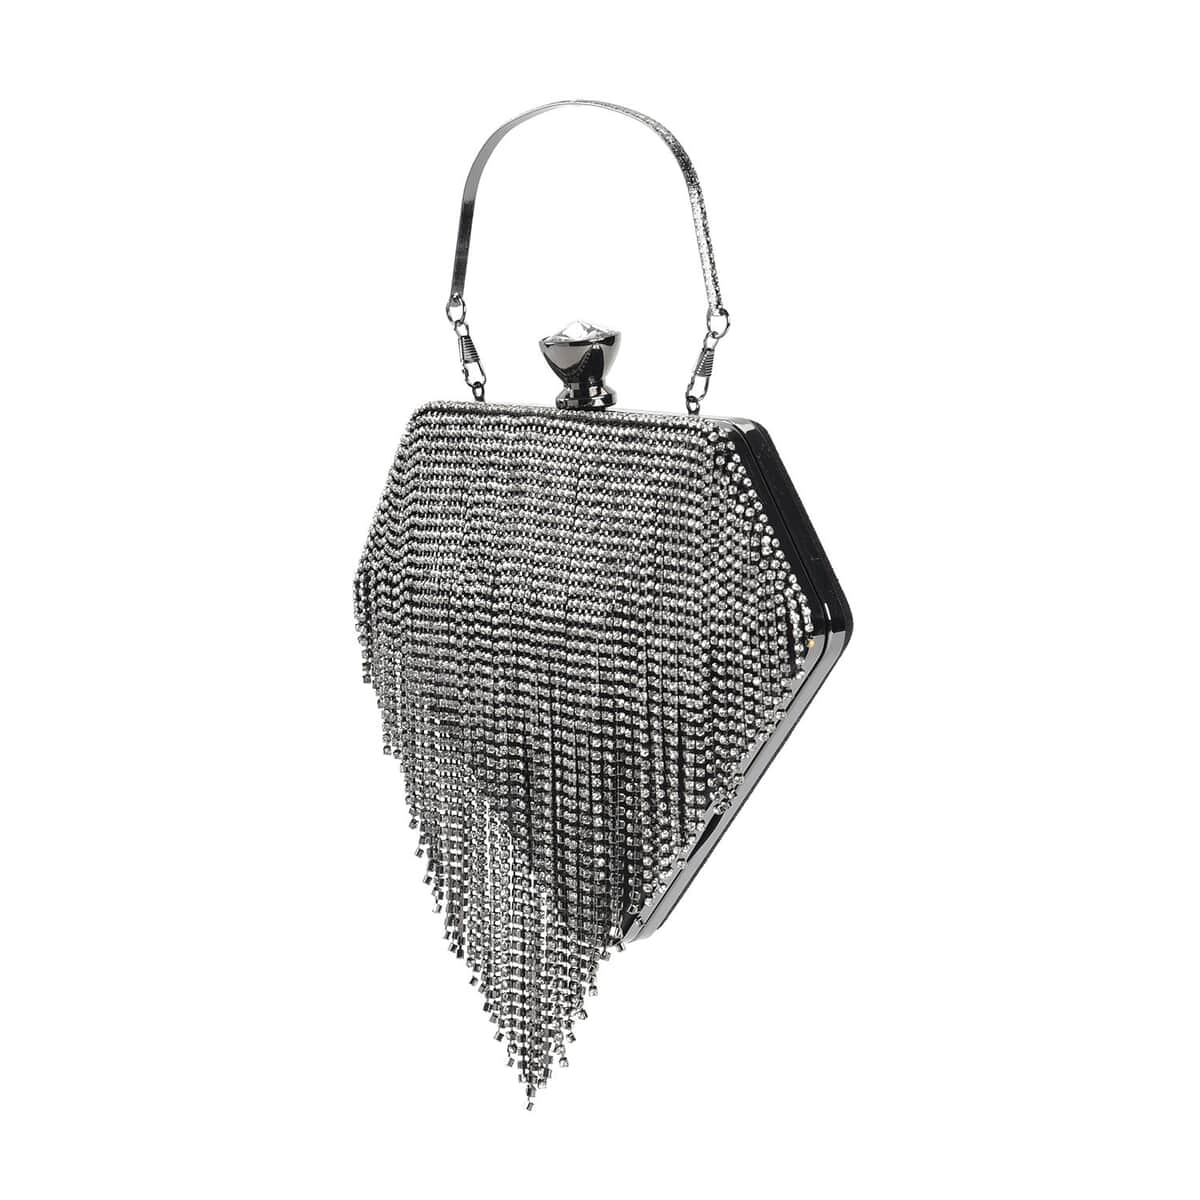 Black Sparkling Crystal Diamond Shape Tassel Clutch Bag with Handle Drop and Chain Strap image number 6